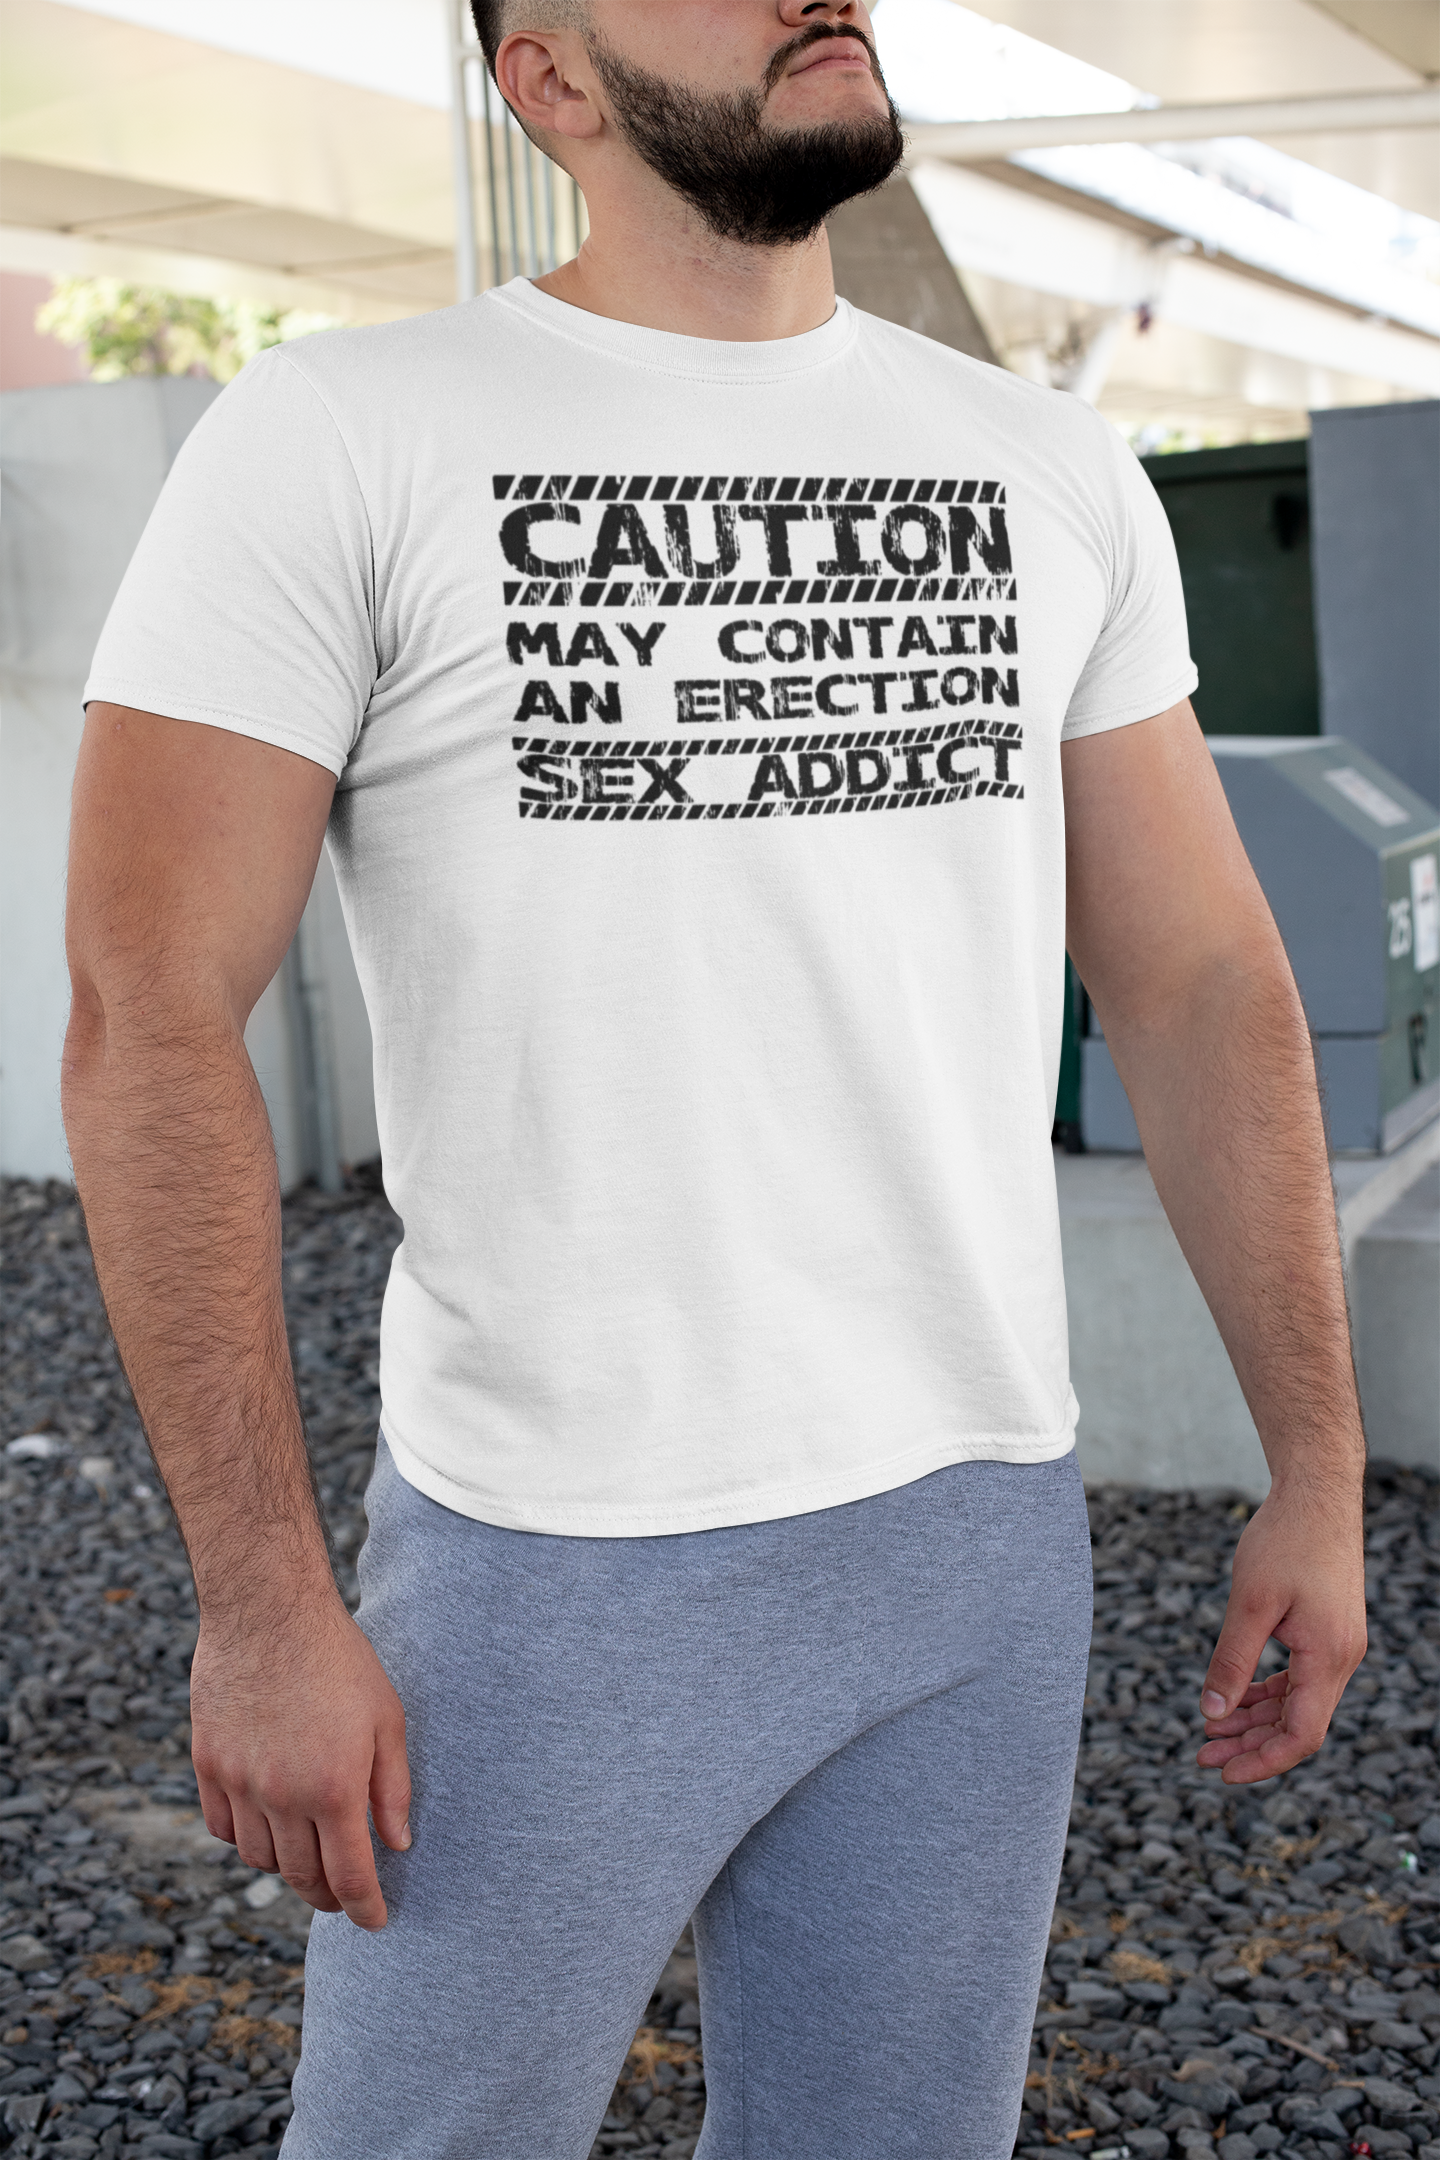 Caution! May contain an erection funny design Classic T-Shirt Swingers Adventures Shop